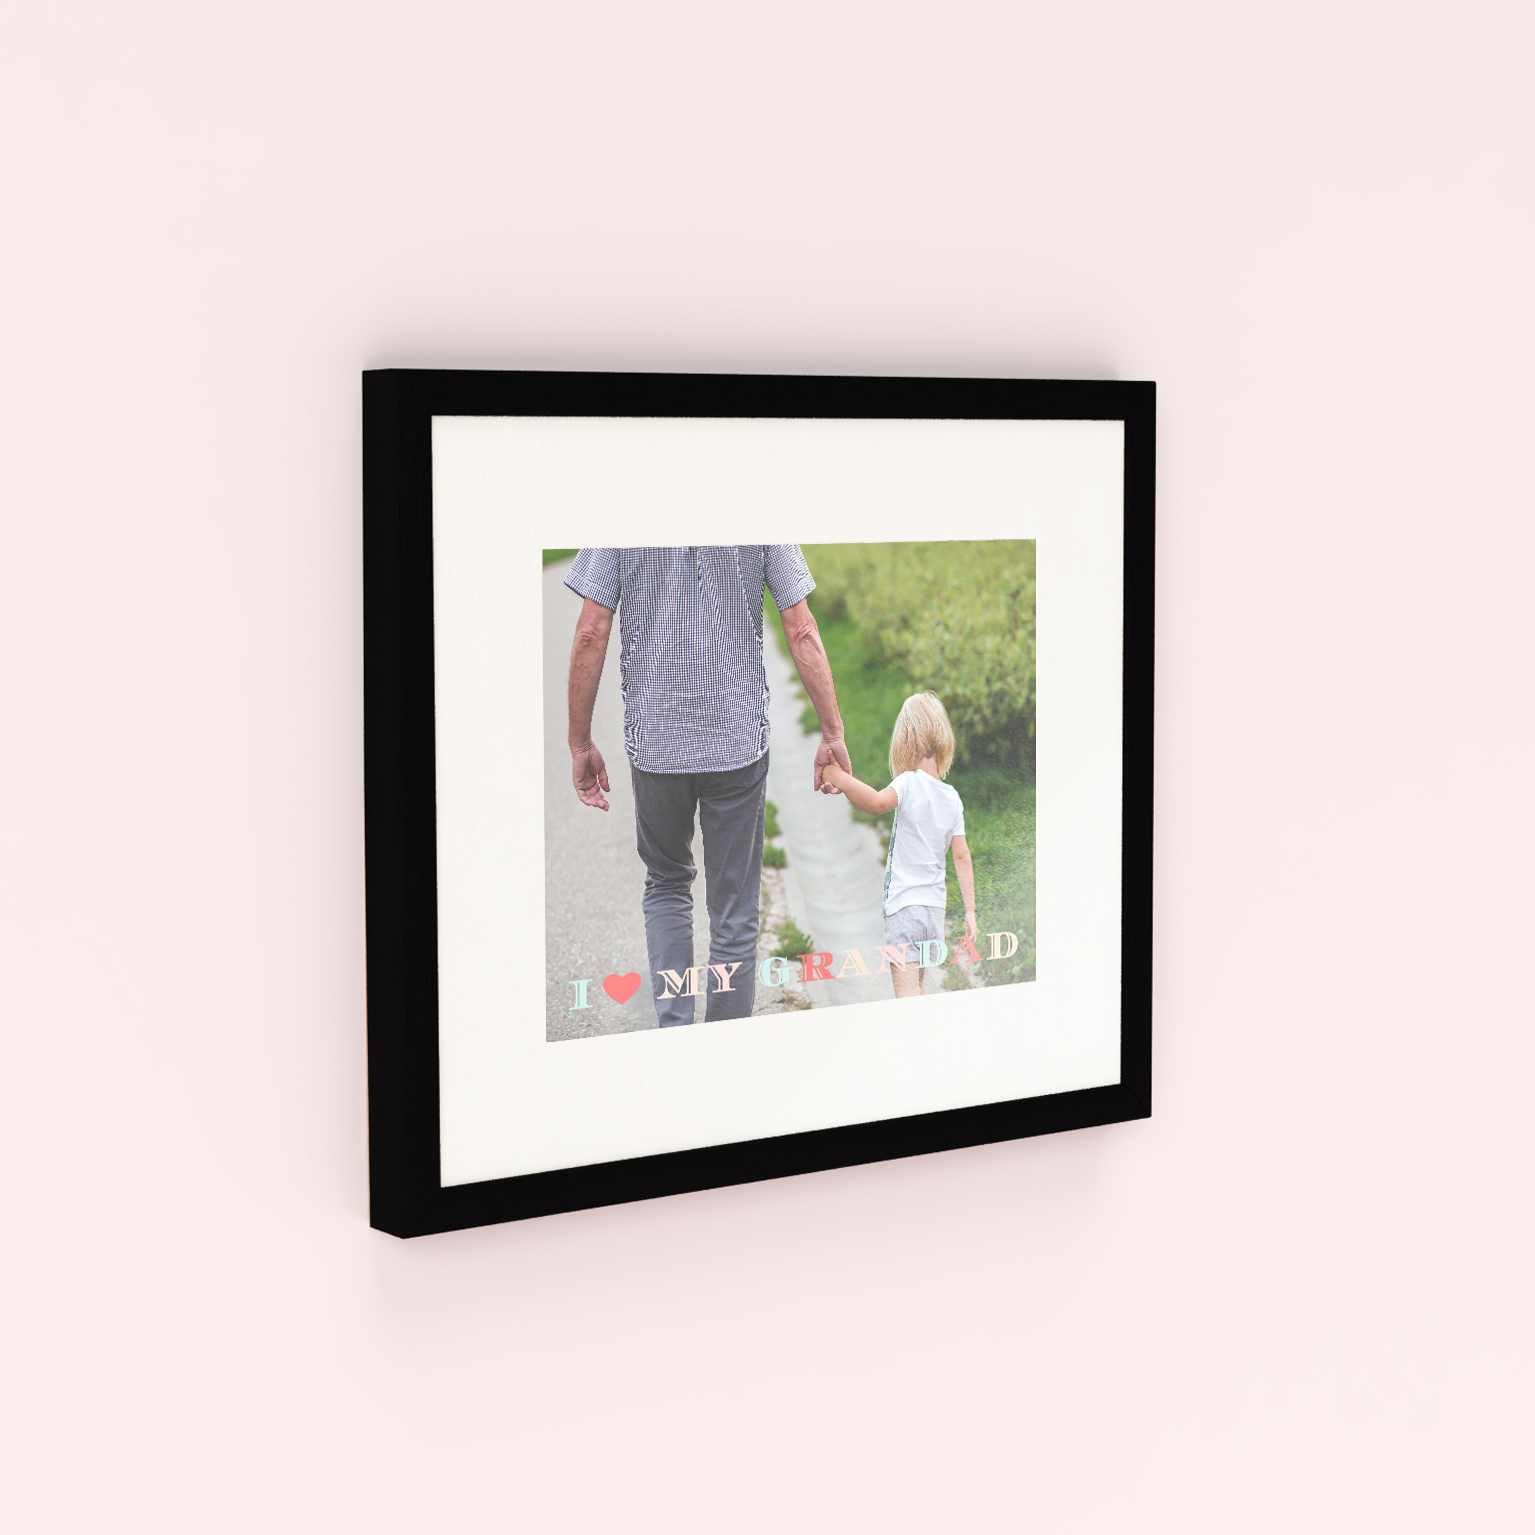 Grandpa's Day Framed Photo Prints - Immerse yourself in cherished memories with our landscape-oriented design. Elegantly showcasing your favorite photo with a captivating 3D effect, adding depth and dimension to your special moments. Celebrate the love of a grandfather with this visually stunning masterpiece.